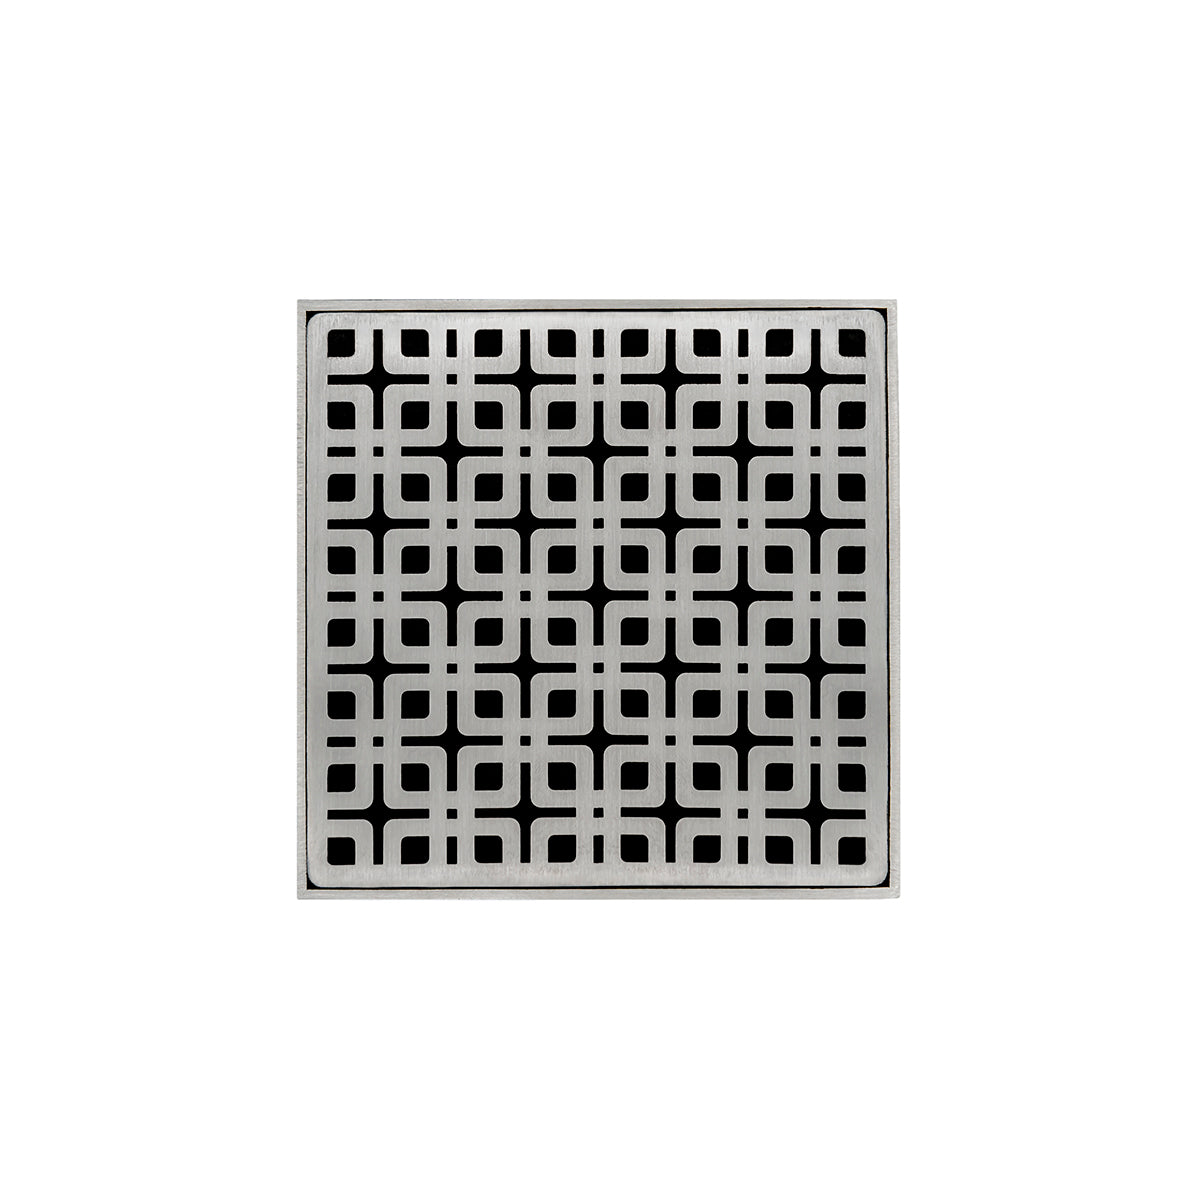 Infinity Drain 5" x 5" KD 5 Premium Center Drain Kit with Link Pattern Decorative Plate with PVC Drain Body, 2" Outlet